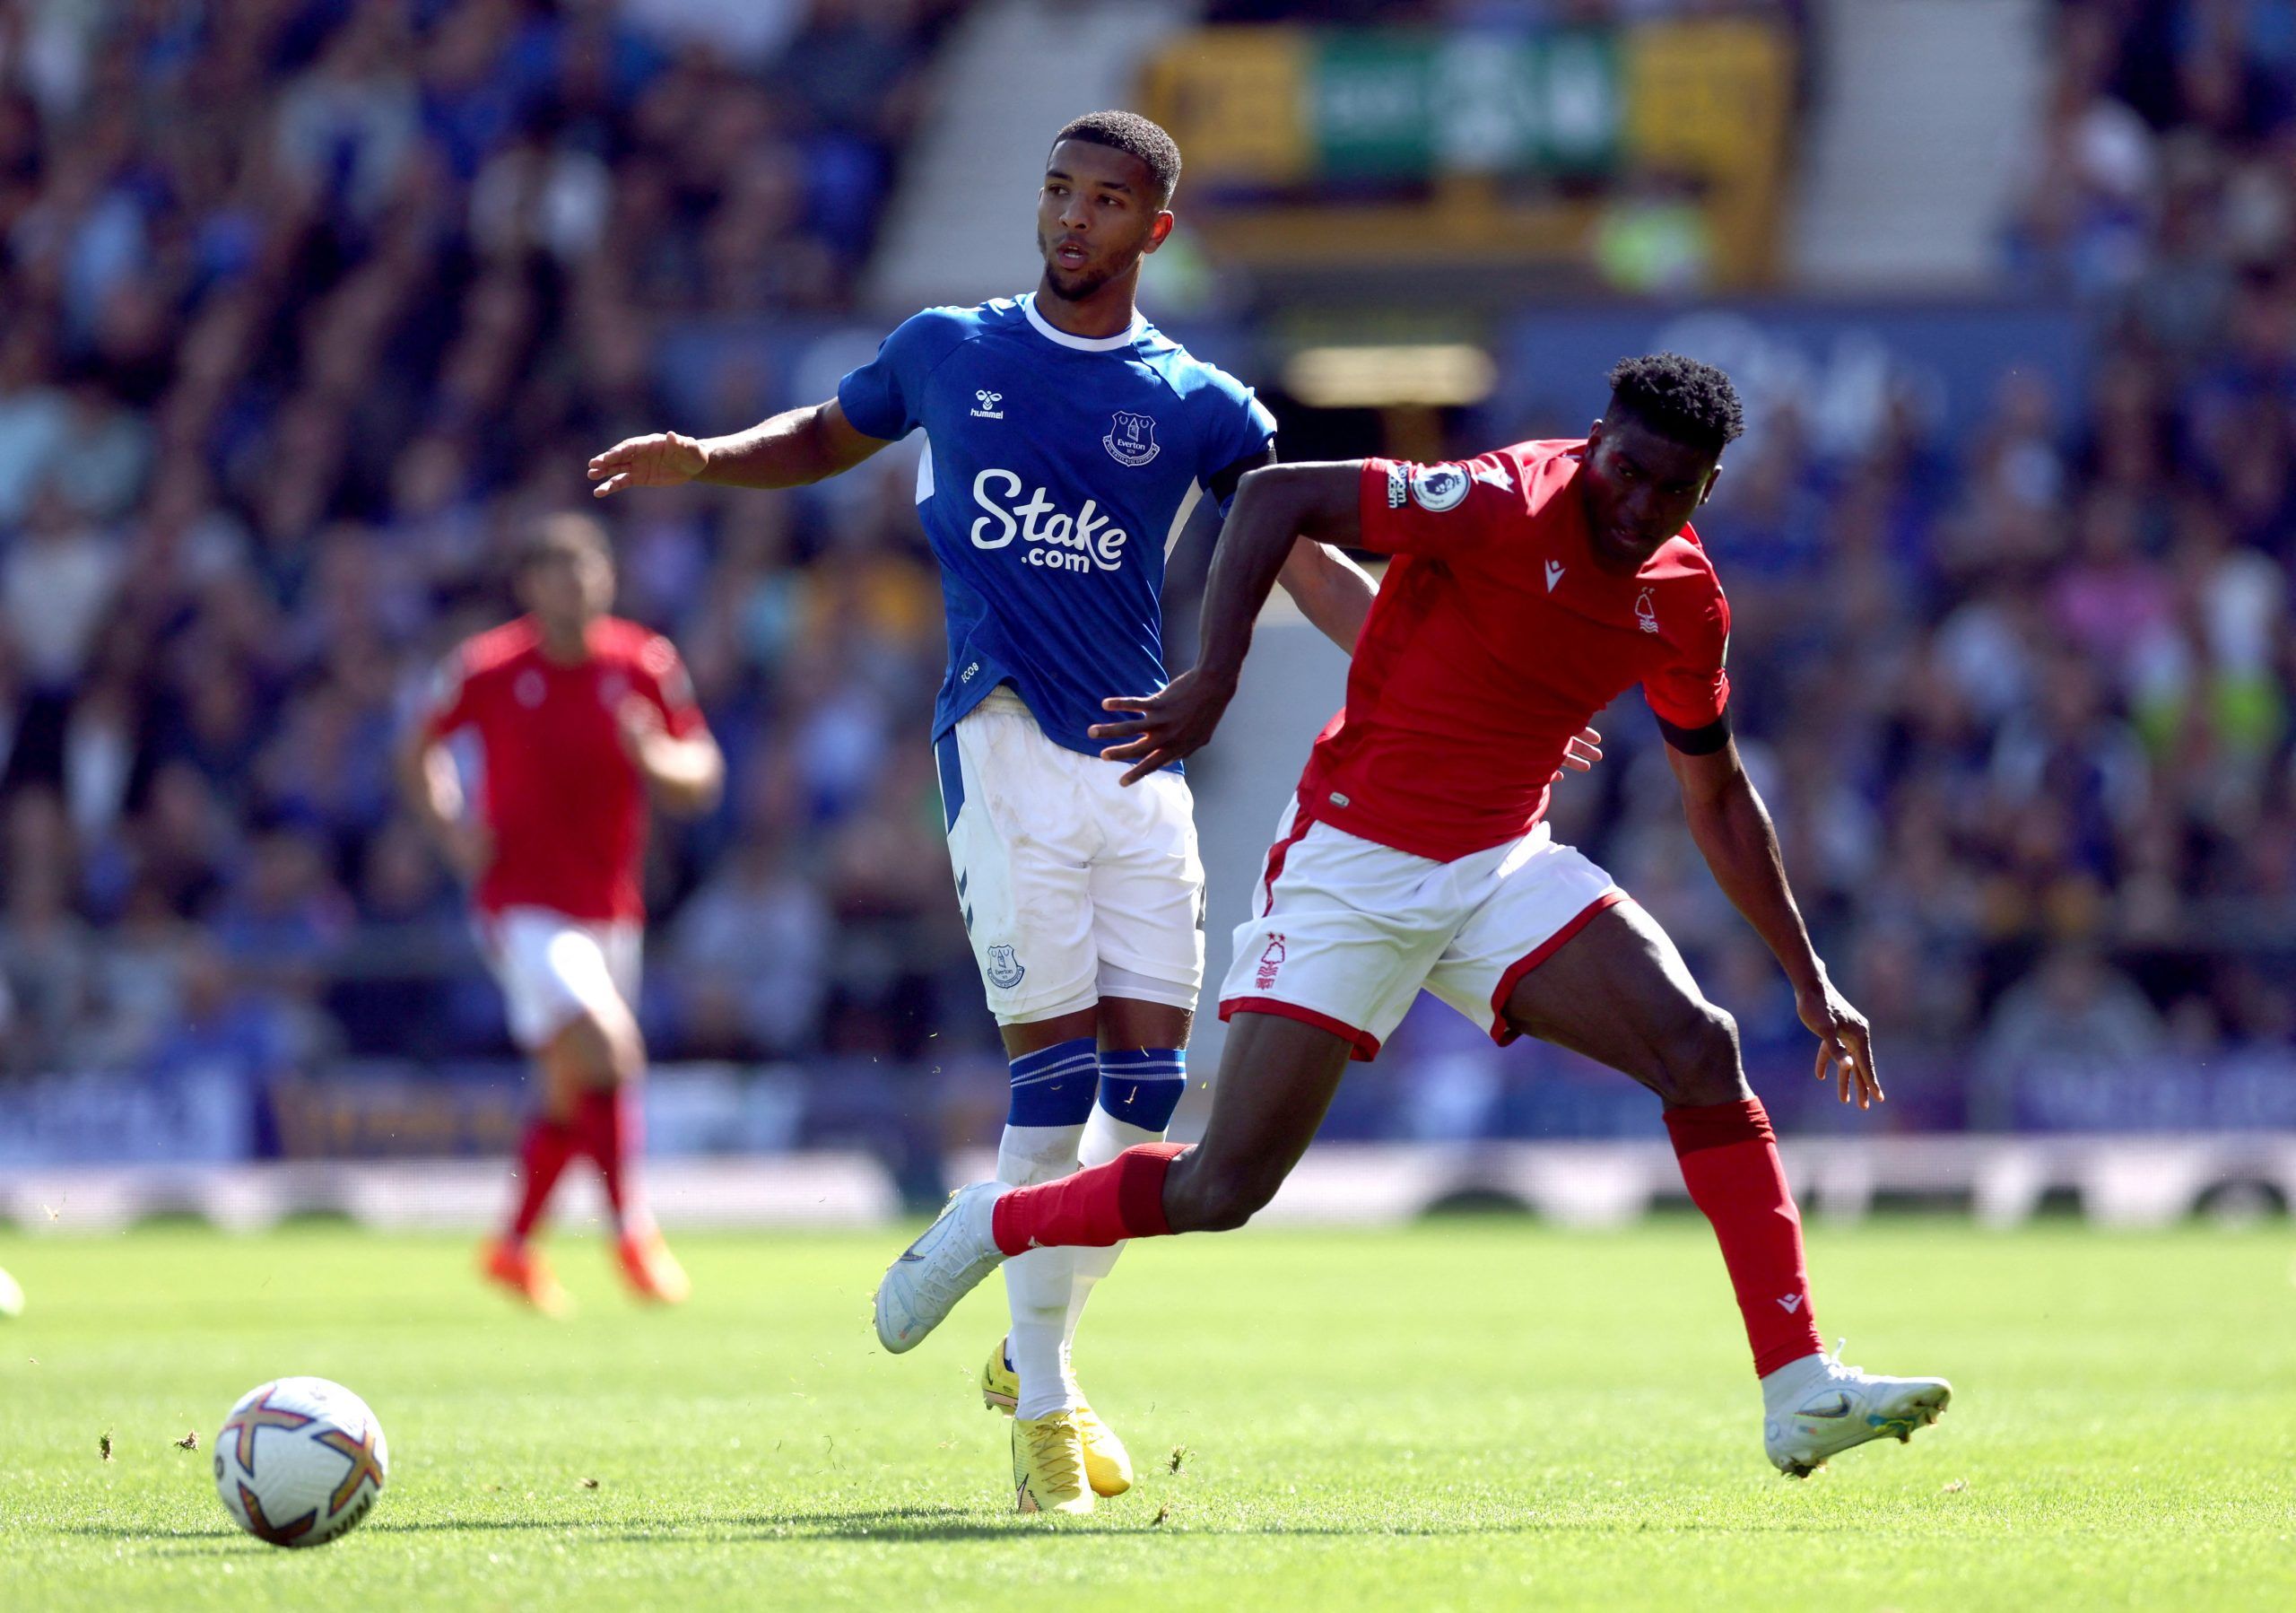 Soccer Football - Premier League - Everton v Nottingham Forest - Goodison Park, Liverpool, Britain - August 20, 2022 Everton's Mason Holgate in action with Nottingham Forest's Taiwo Awoniyi Action Images via Reuters/Lee Smith EDITORIAL USE ONLY. No use with unauthorized audio, video, data, fixture lists, club/league logos or 'live' services. Online in-match use limited to 75 images, no video emulation. No use in betting, games or single club /league/player publications.  Please contact your acco